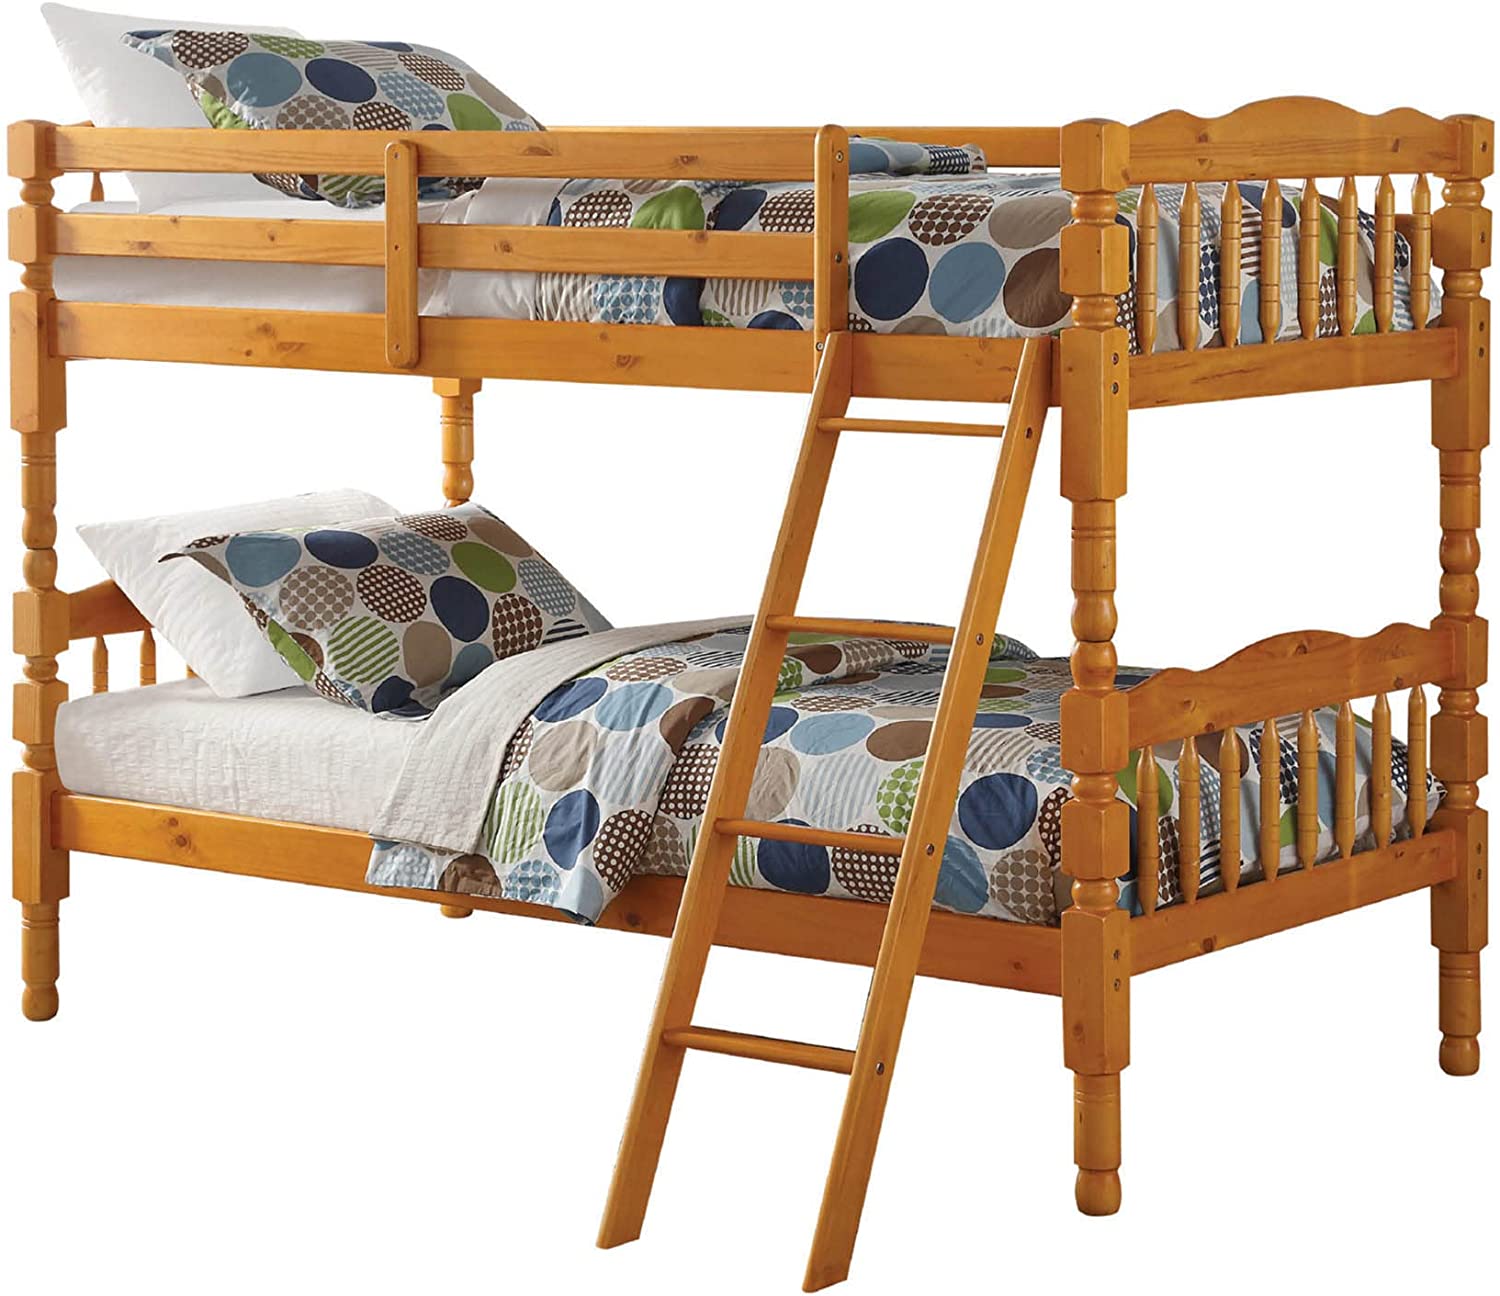 Better Home Products Charlotte Twin Over Twin Solid Wood Bunk Bed in Natural